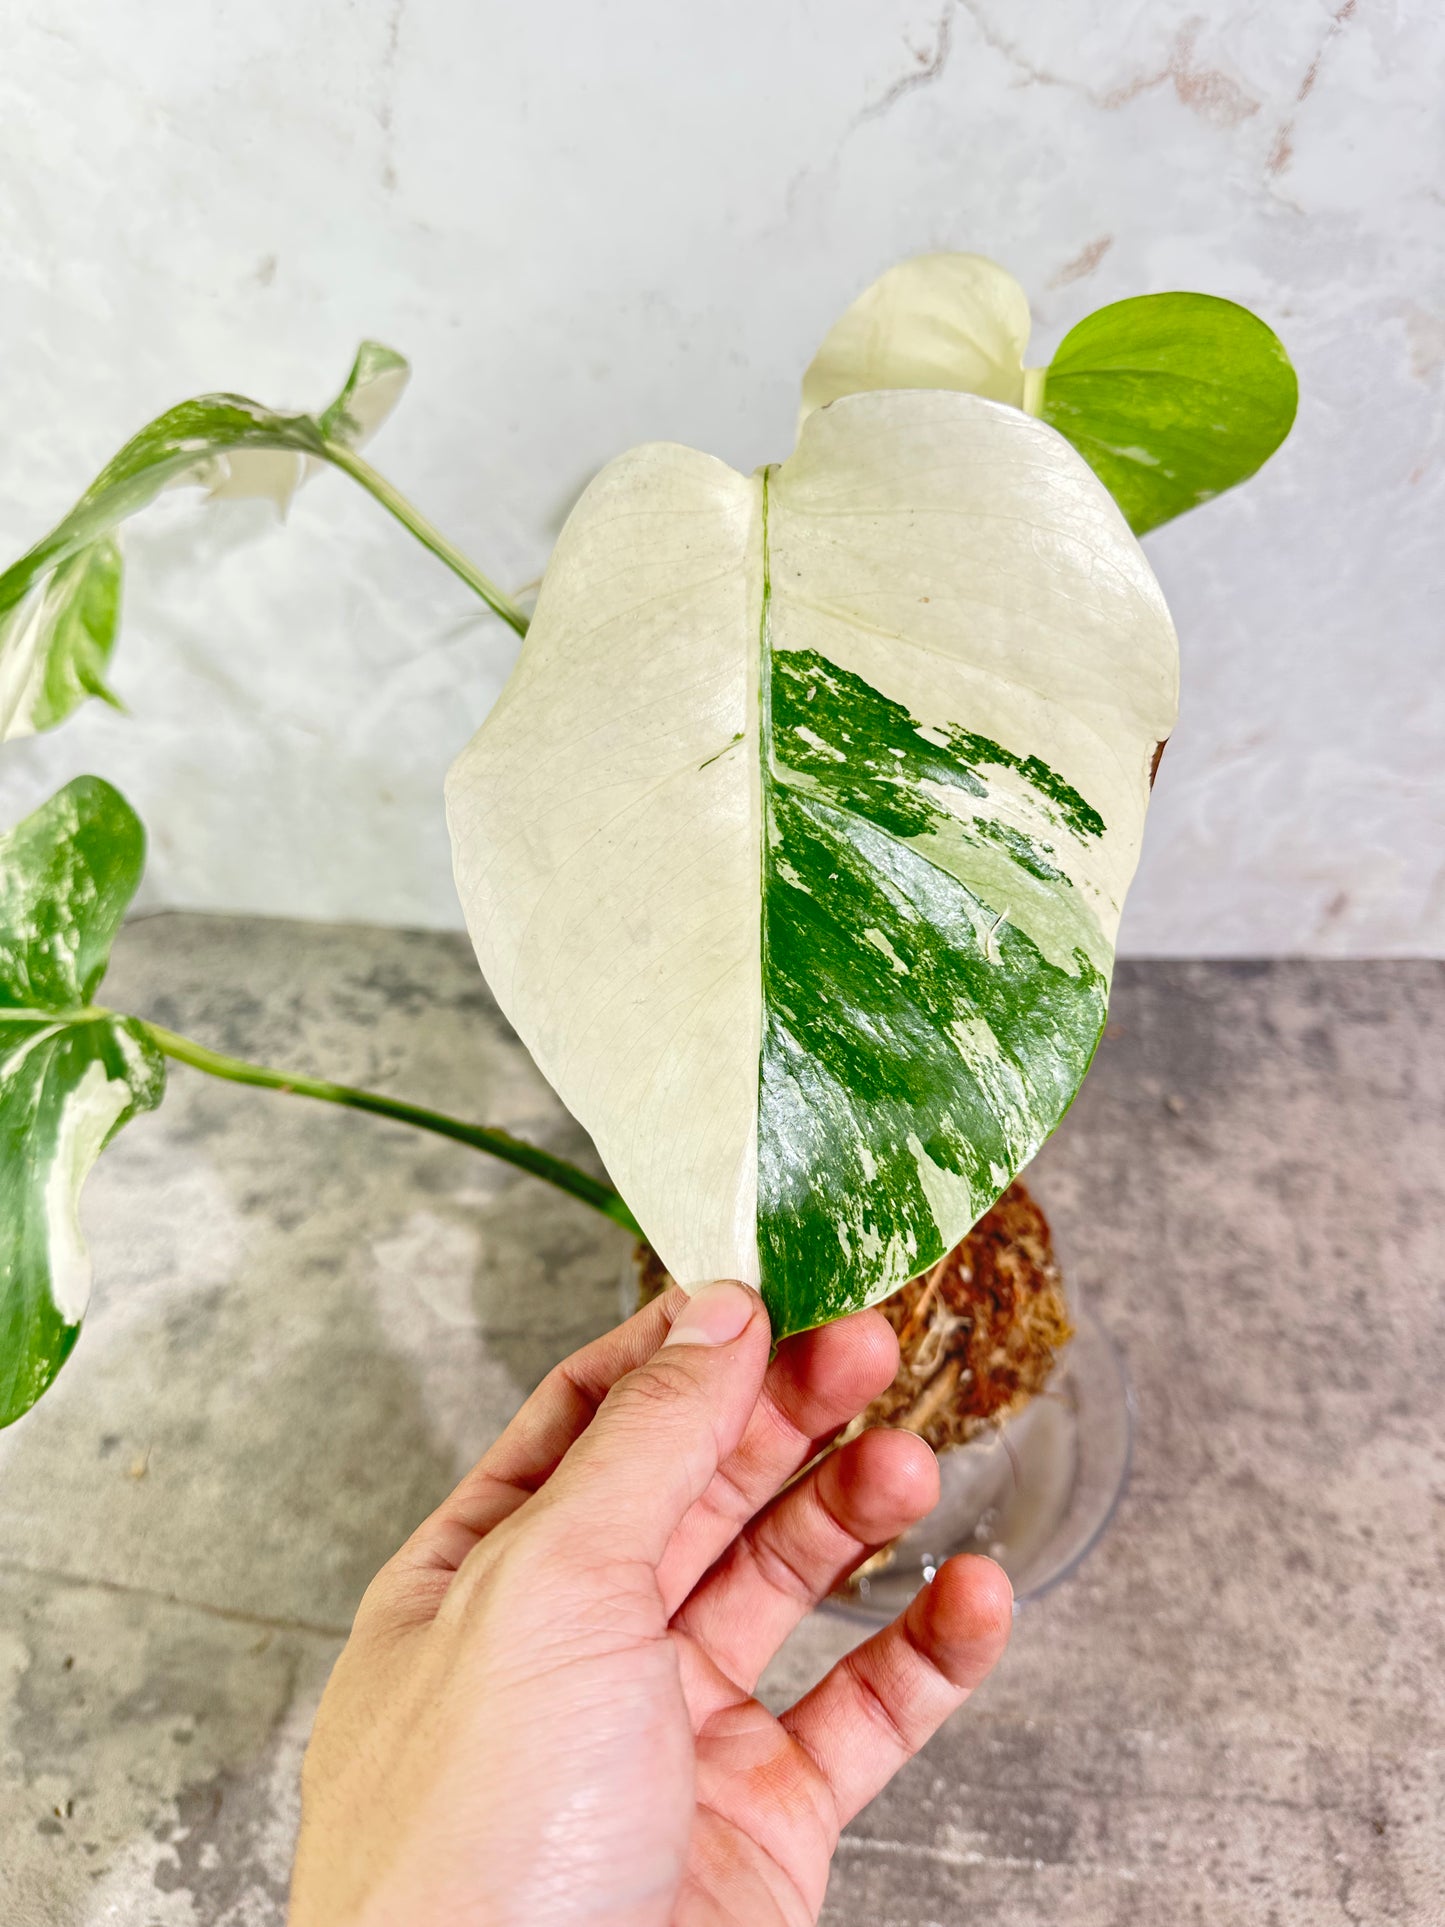 Monstera albo variegated 5 leaves Rooted